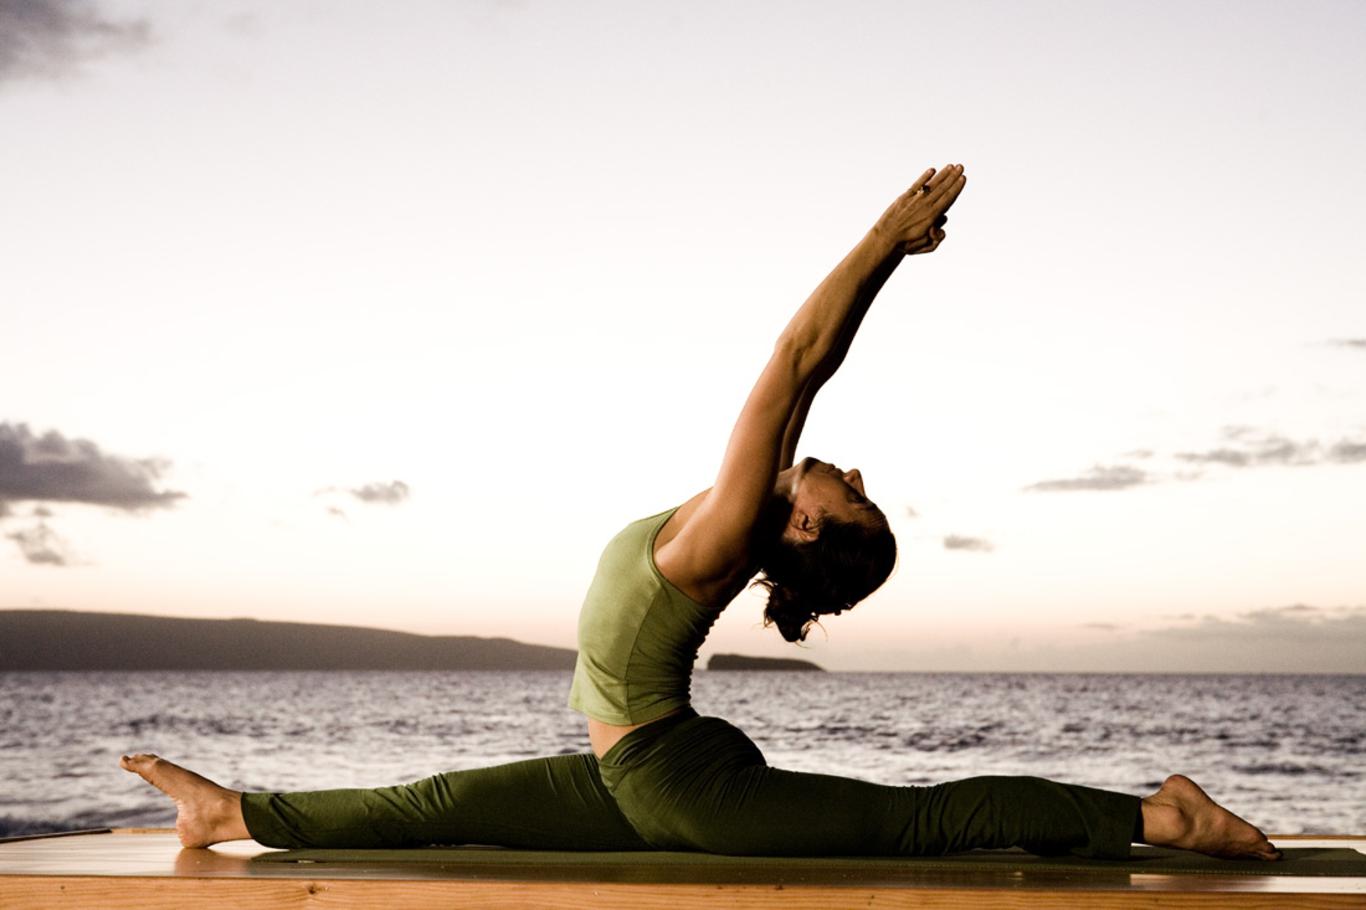 5 DANGERS OF YOGA AND HOW TO PREVENT THEM